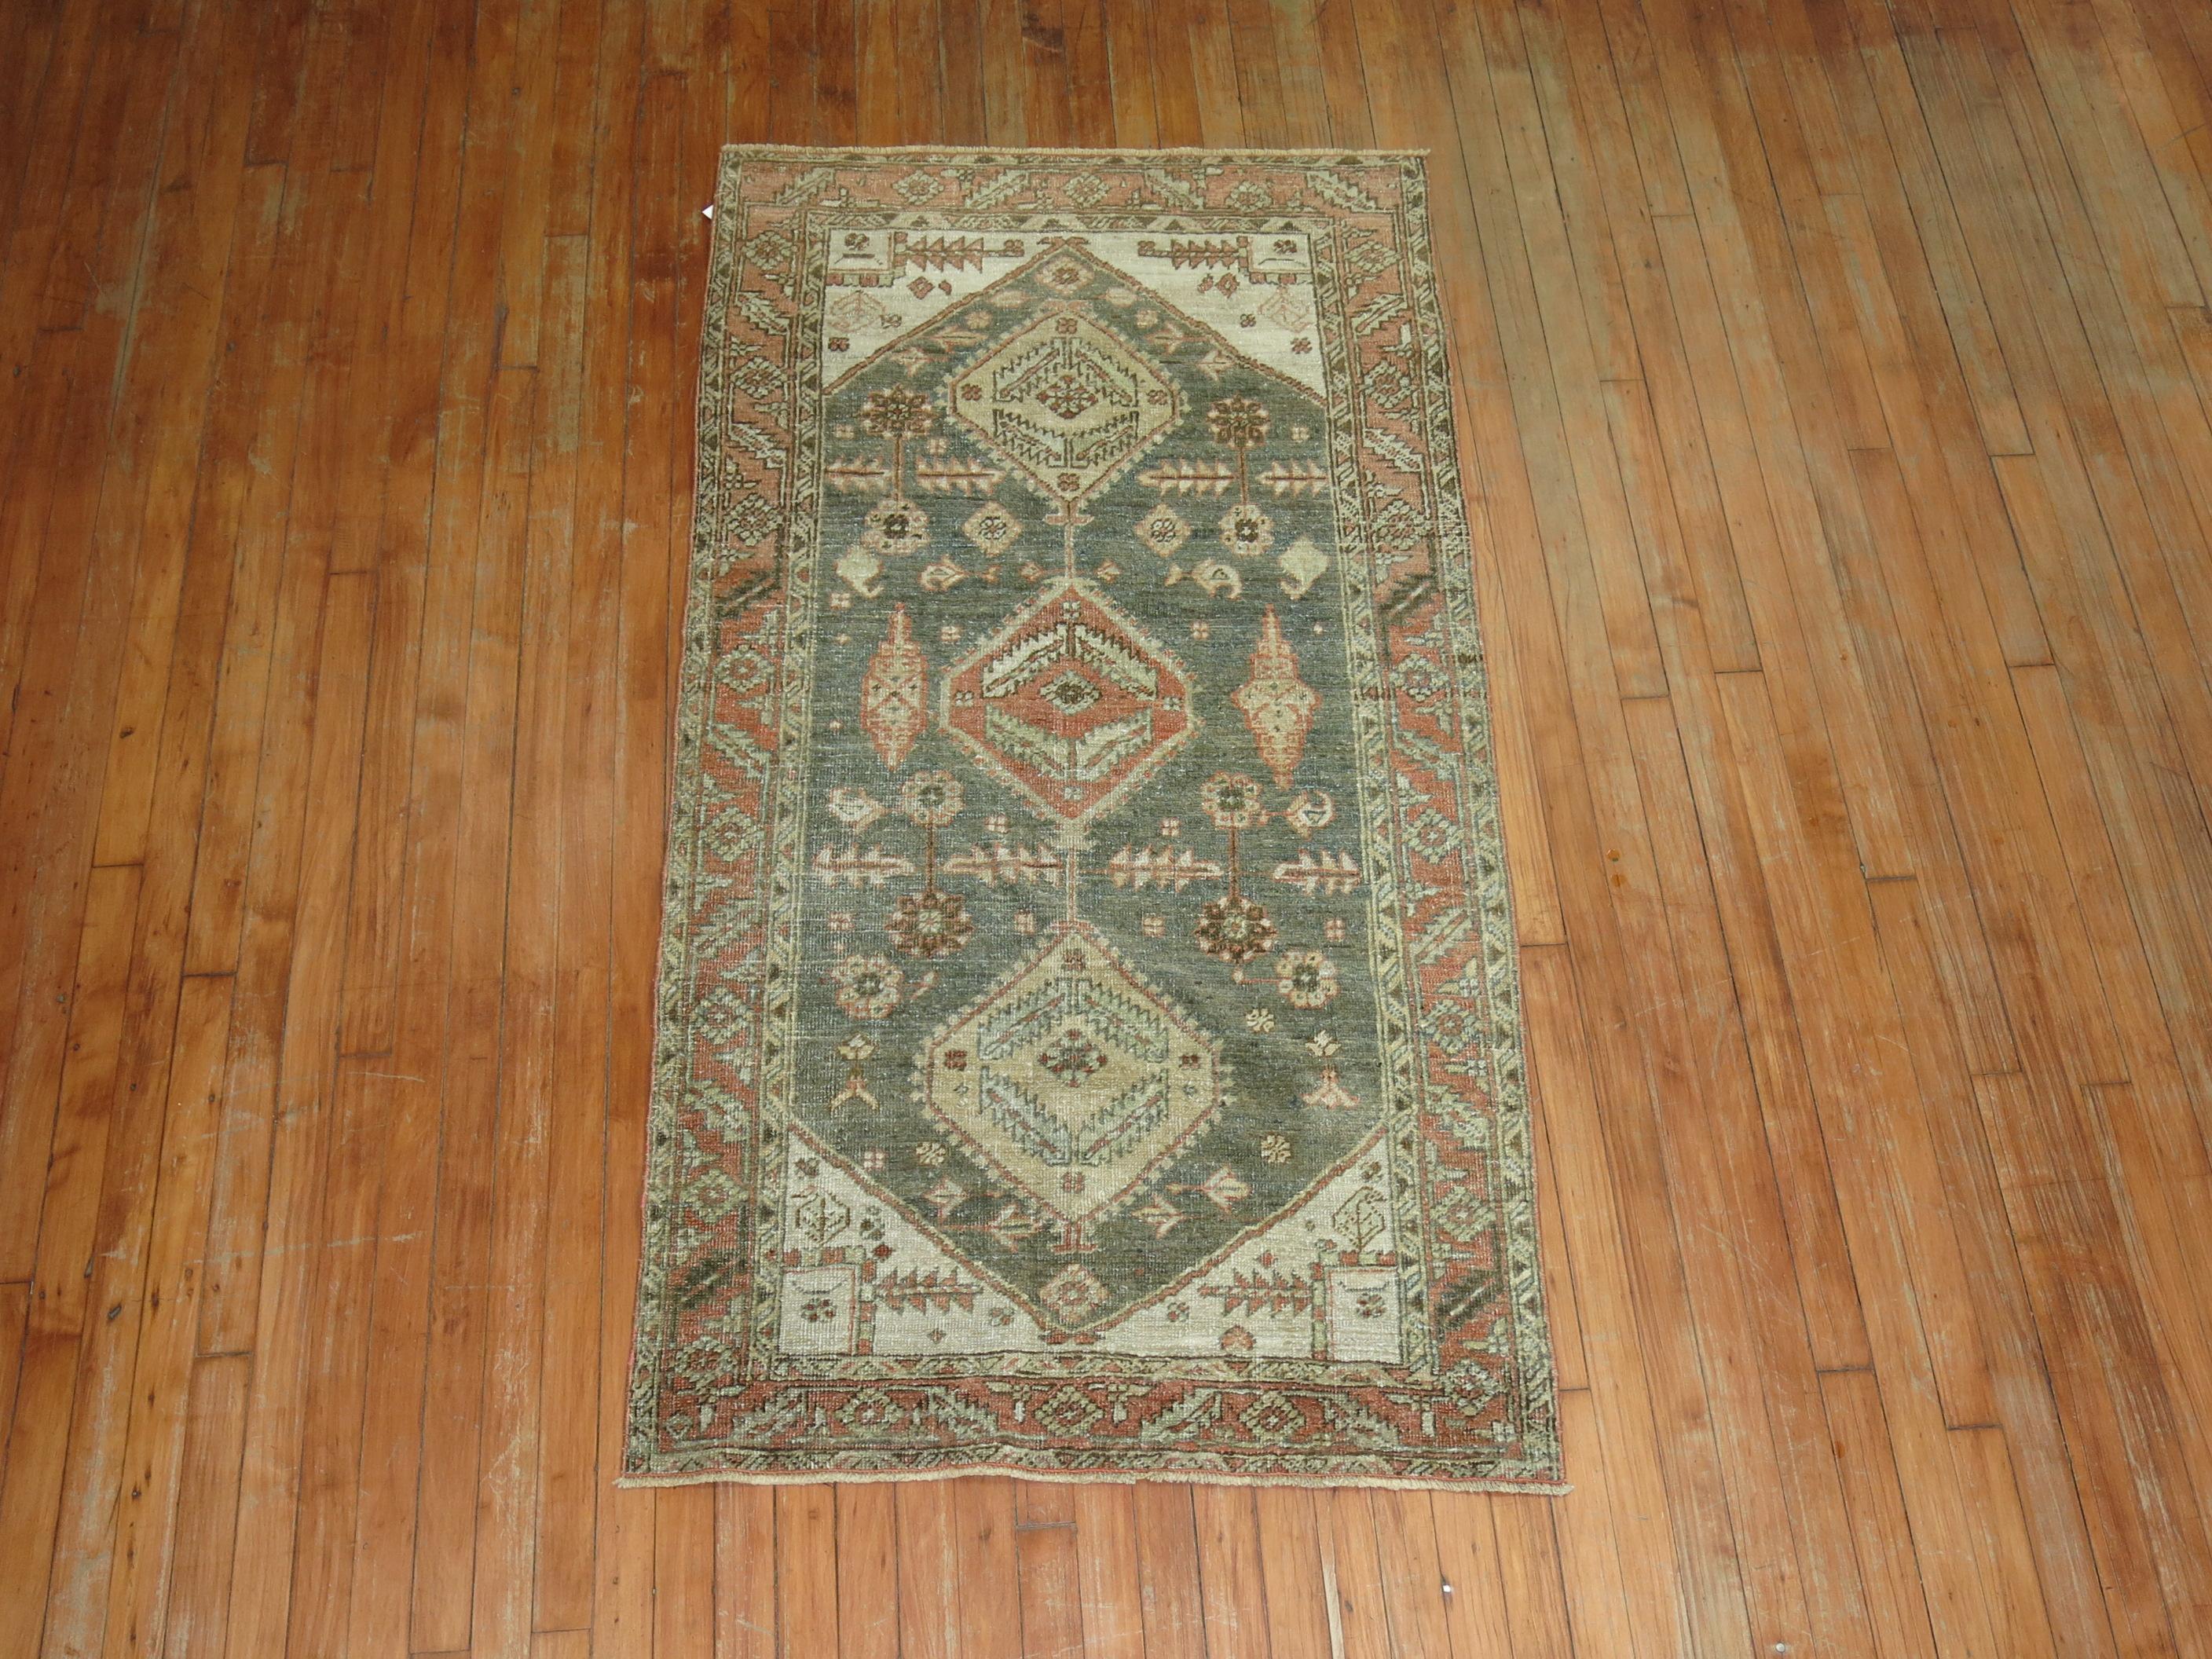 Earth color Persian Heriz Tribal rug with a geometric motif on a green ground, accents in ivory and terracotta, circa 1920.

Measures: 3'1” x 5'11”.